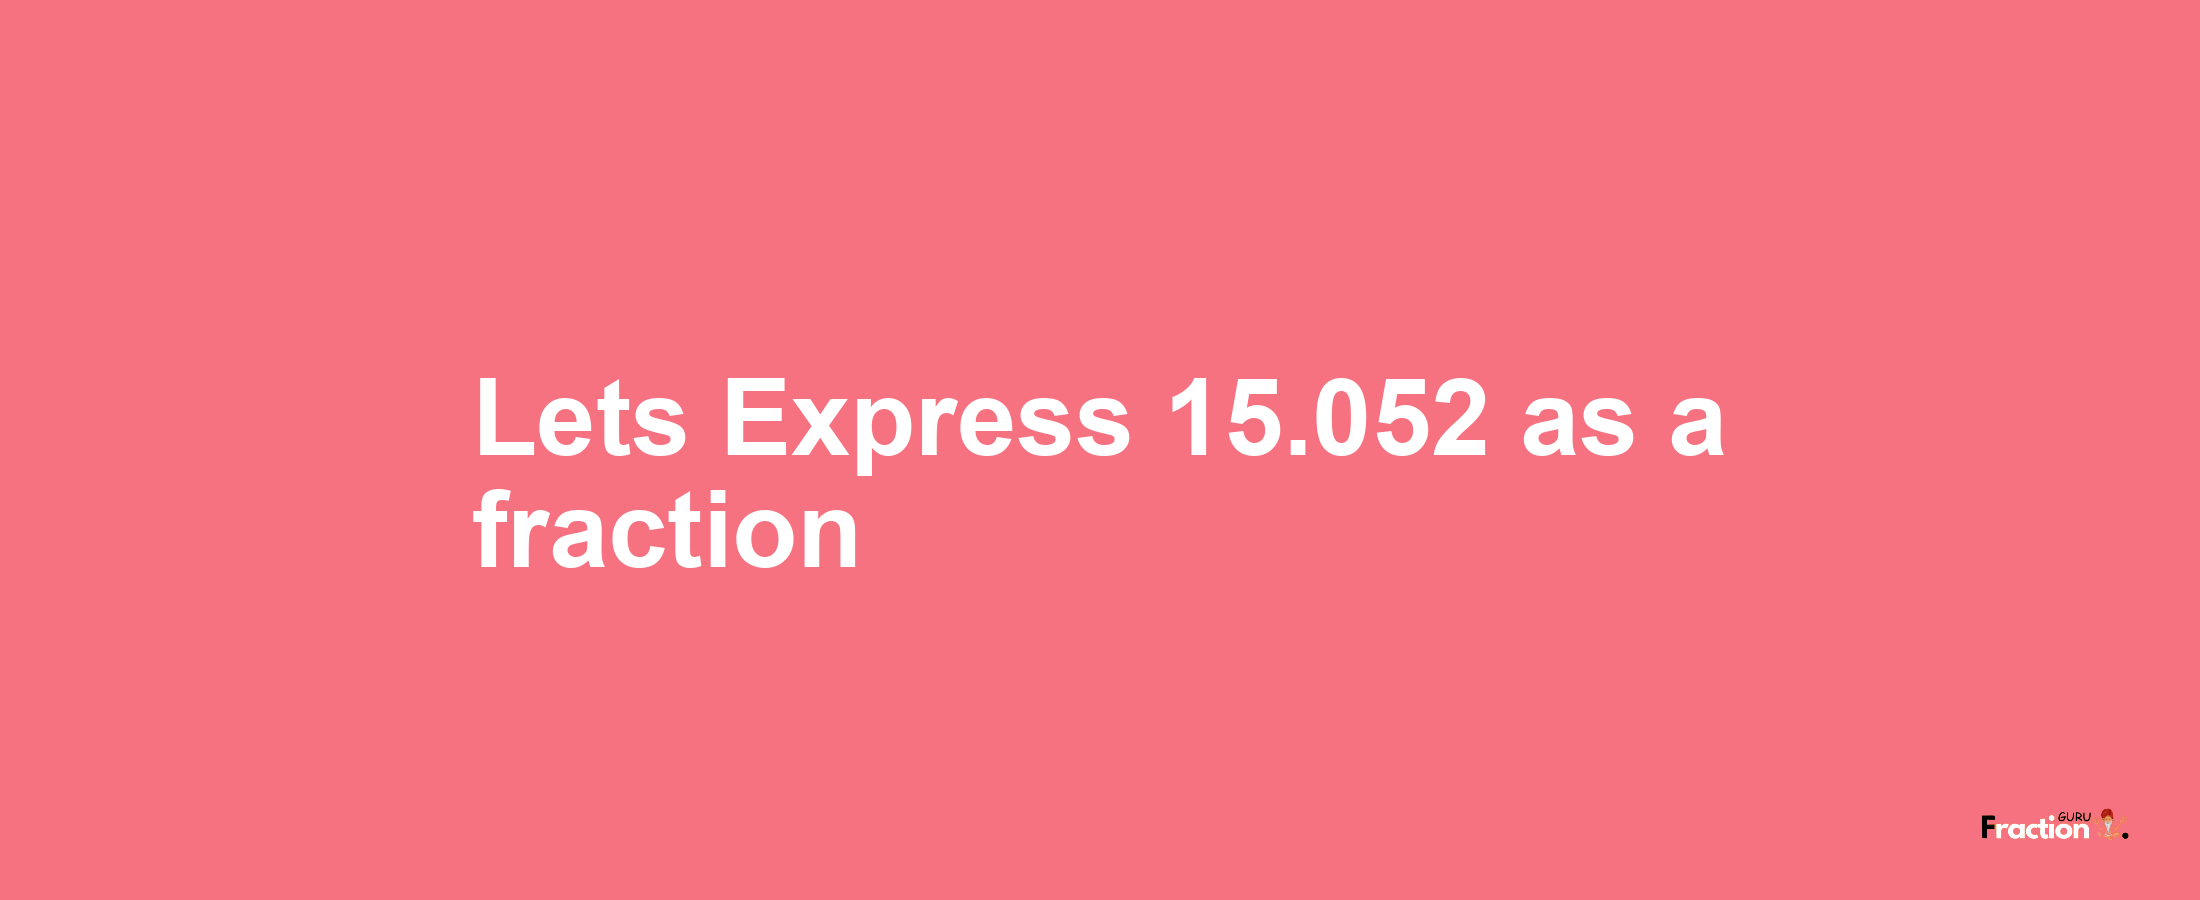 Lets Express 15.052 as afraction